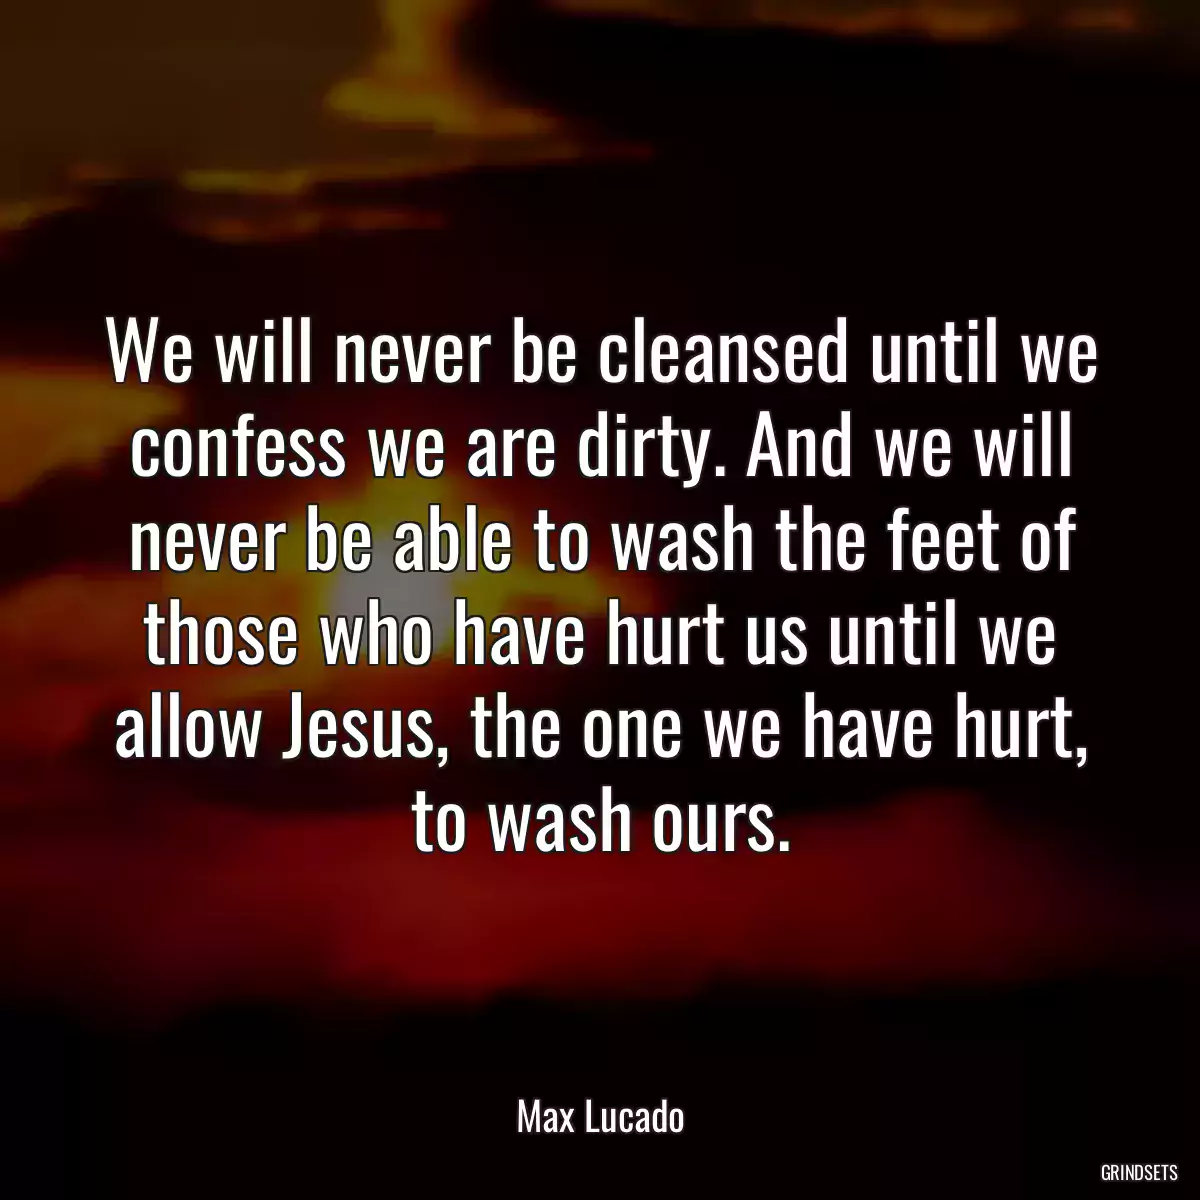 We will never be cleansed until we confess we are dirty. And we will never be able to wash the feet of those who have hurt us until we allow Jesus, the one we have hurt, to wash ours.